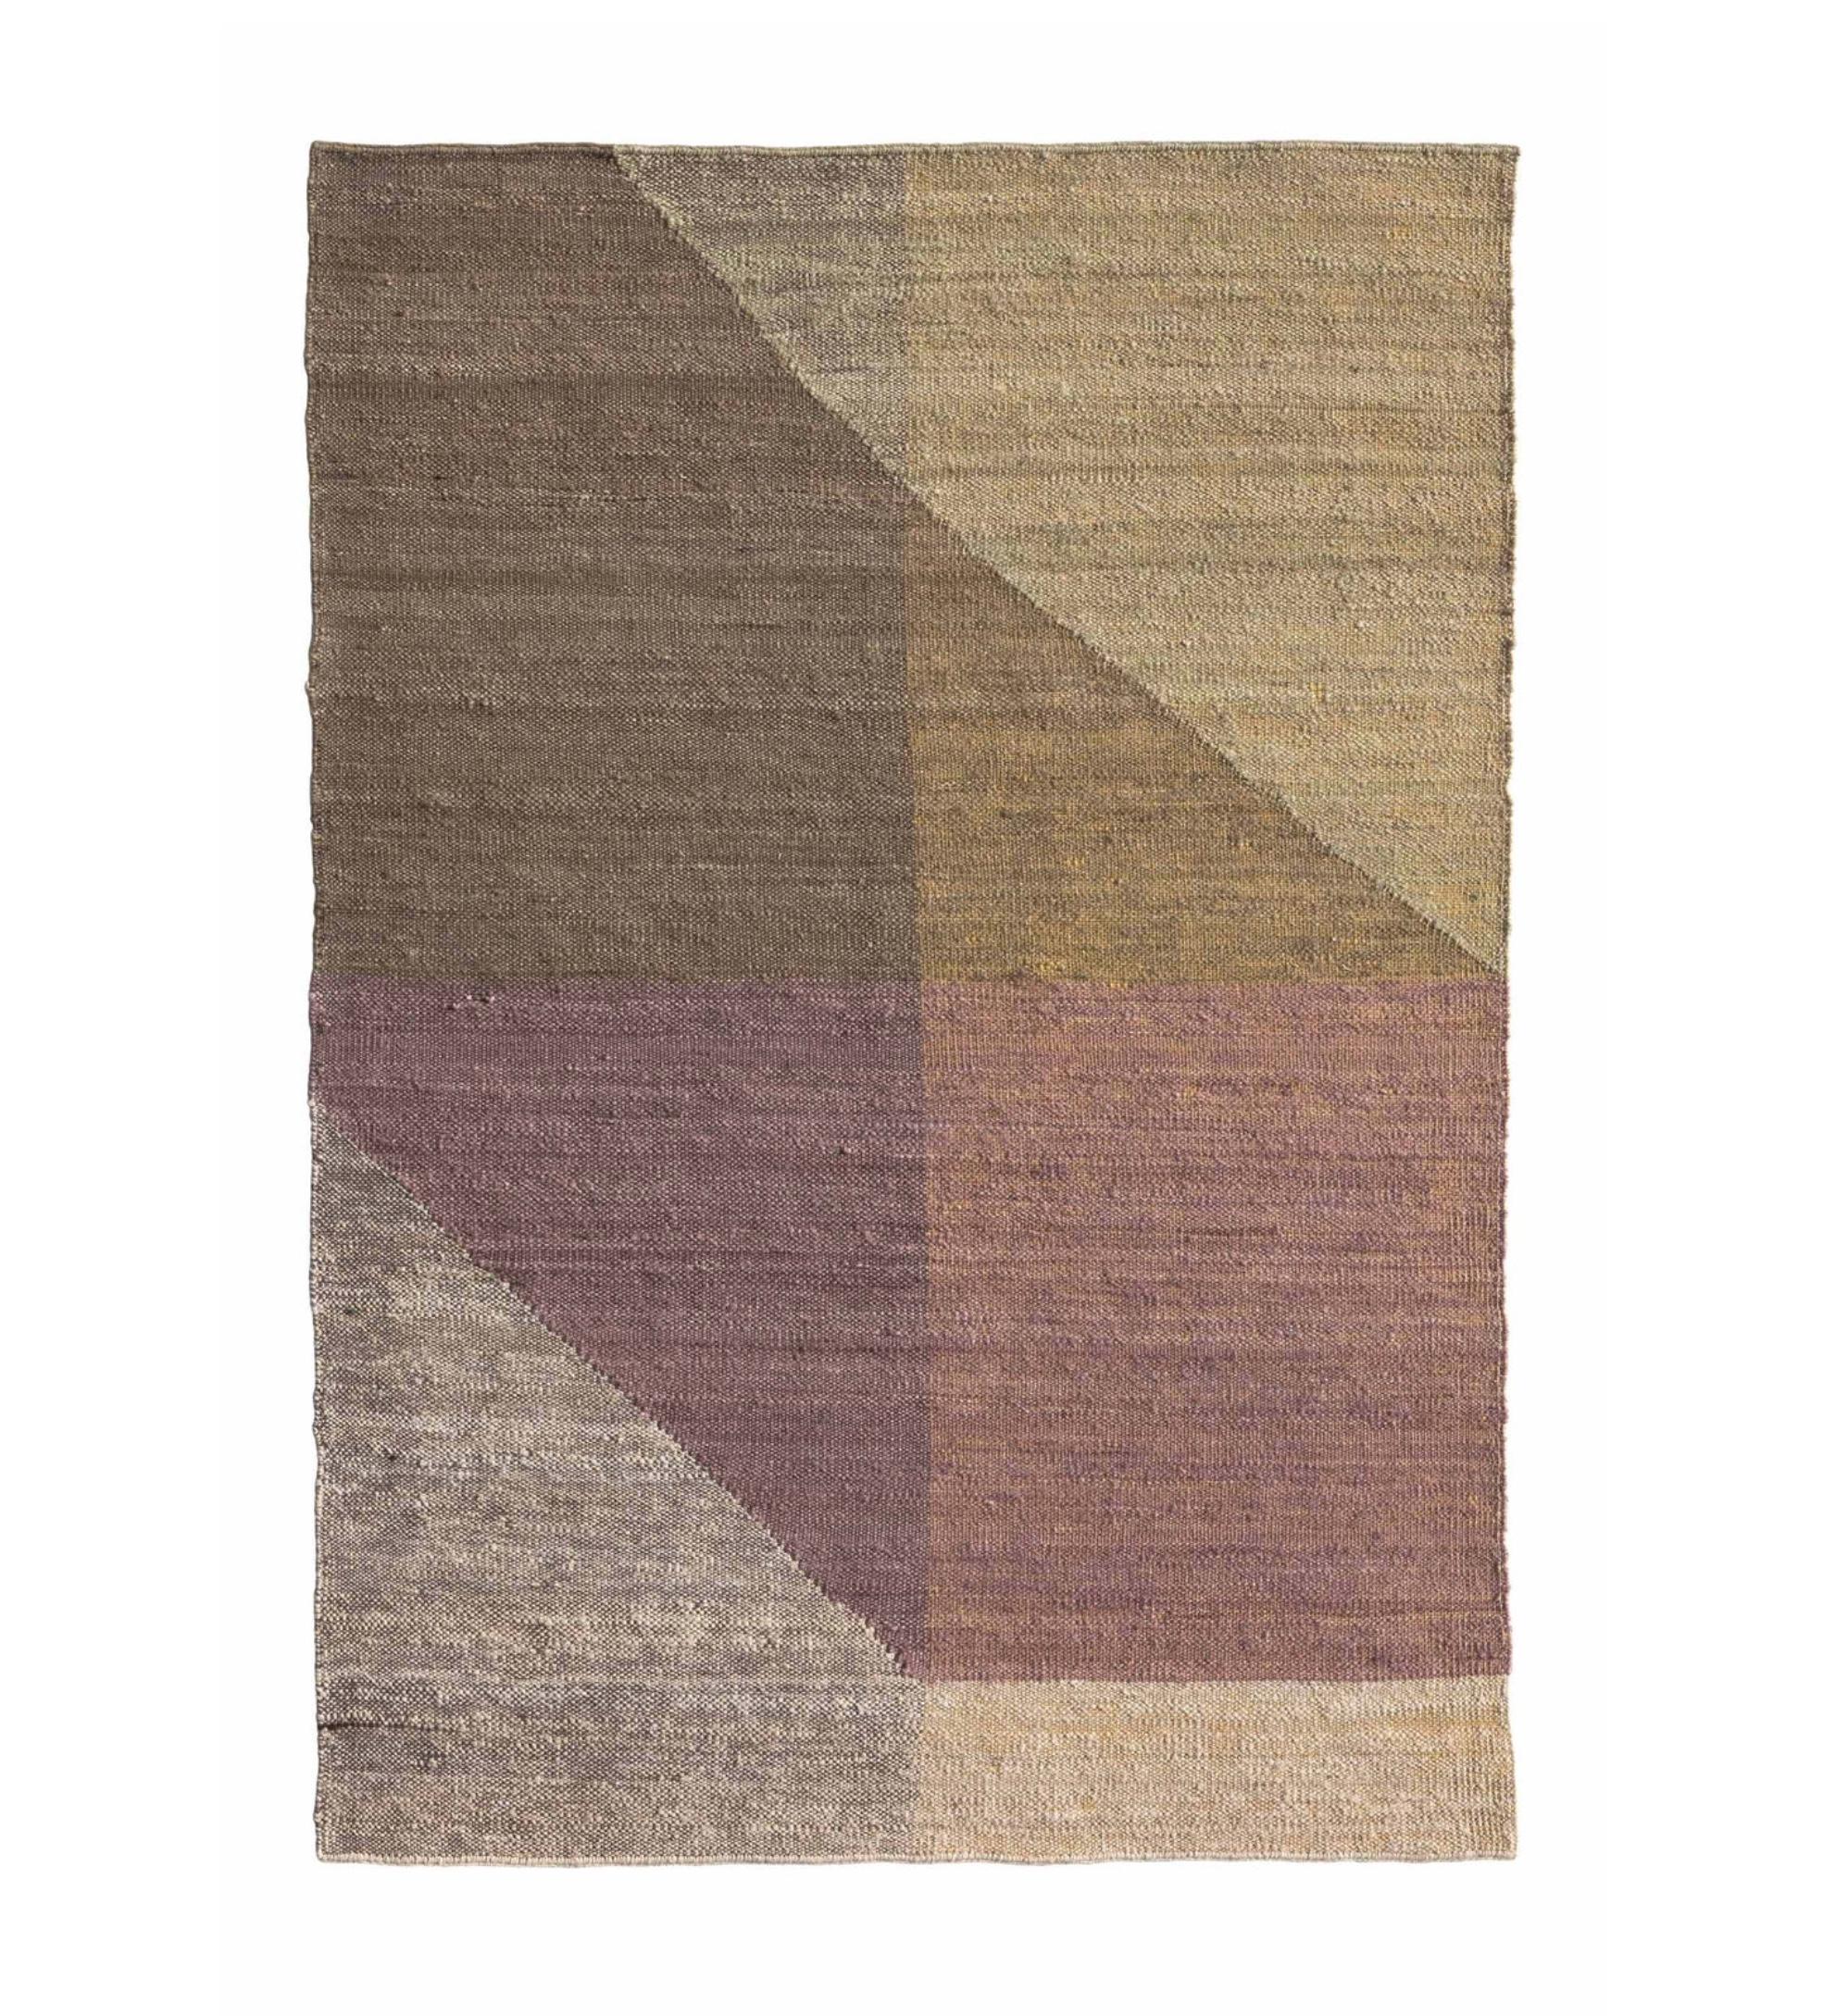 Mathias Hahn 'Capas 5' Kilim Rug for Nanimarquina. Current production, Spain.

By using layers, Mathias Han manages to create a variety of tonalities, textures and shades. This is a light and informal rug, hand-woven using the ancestral Kilim